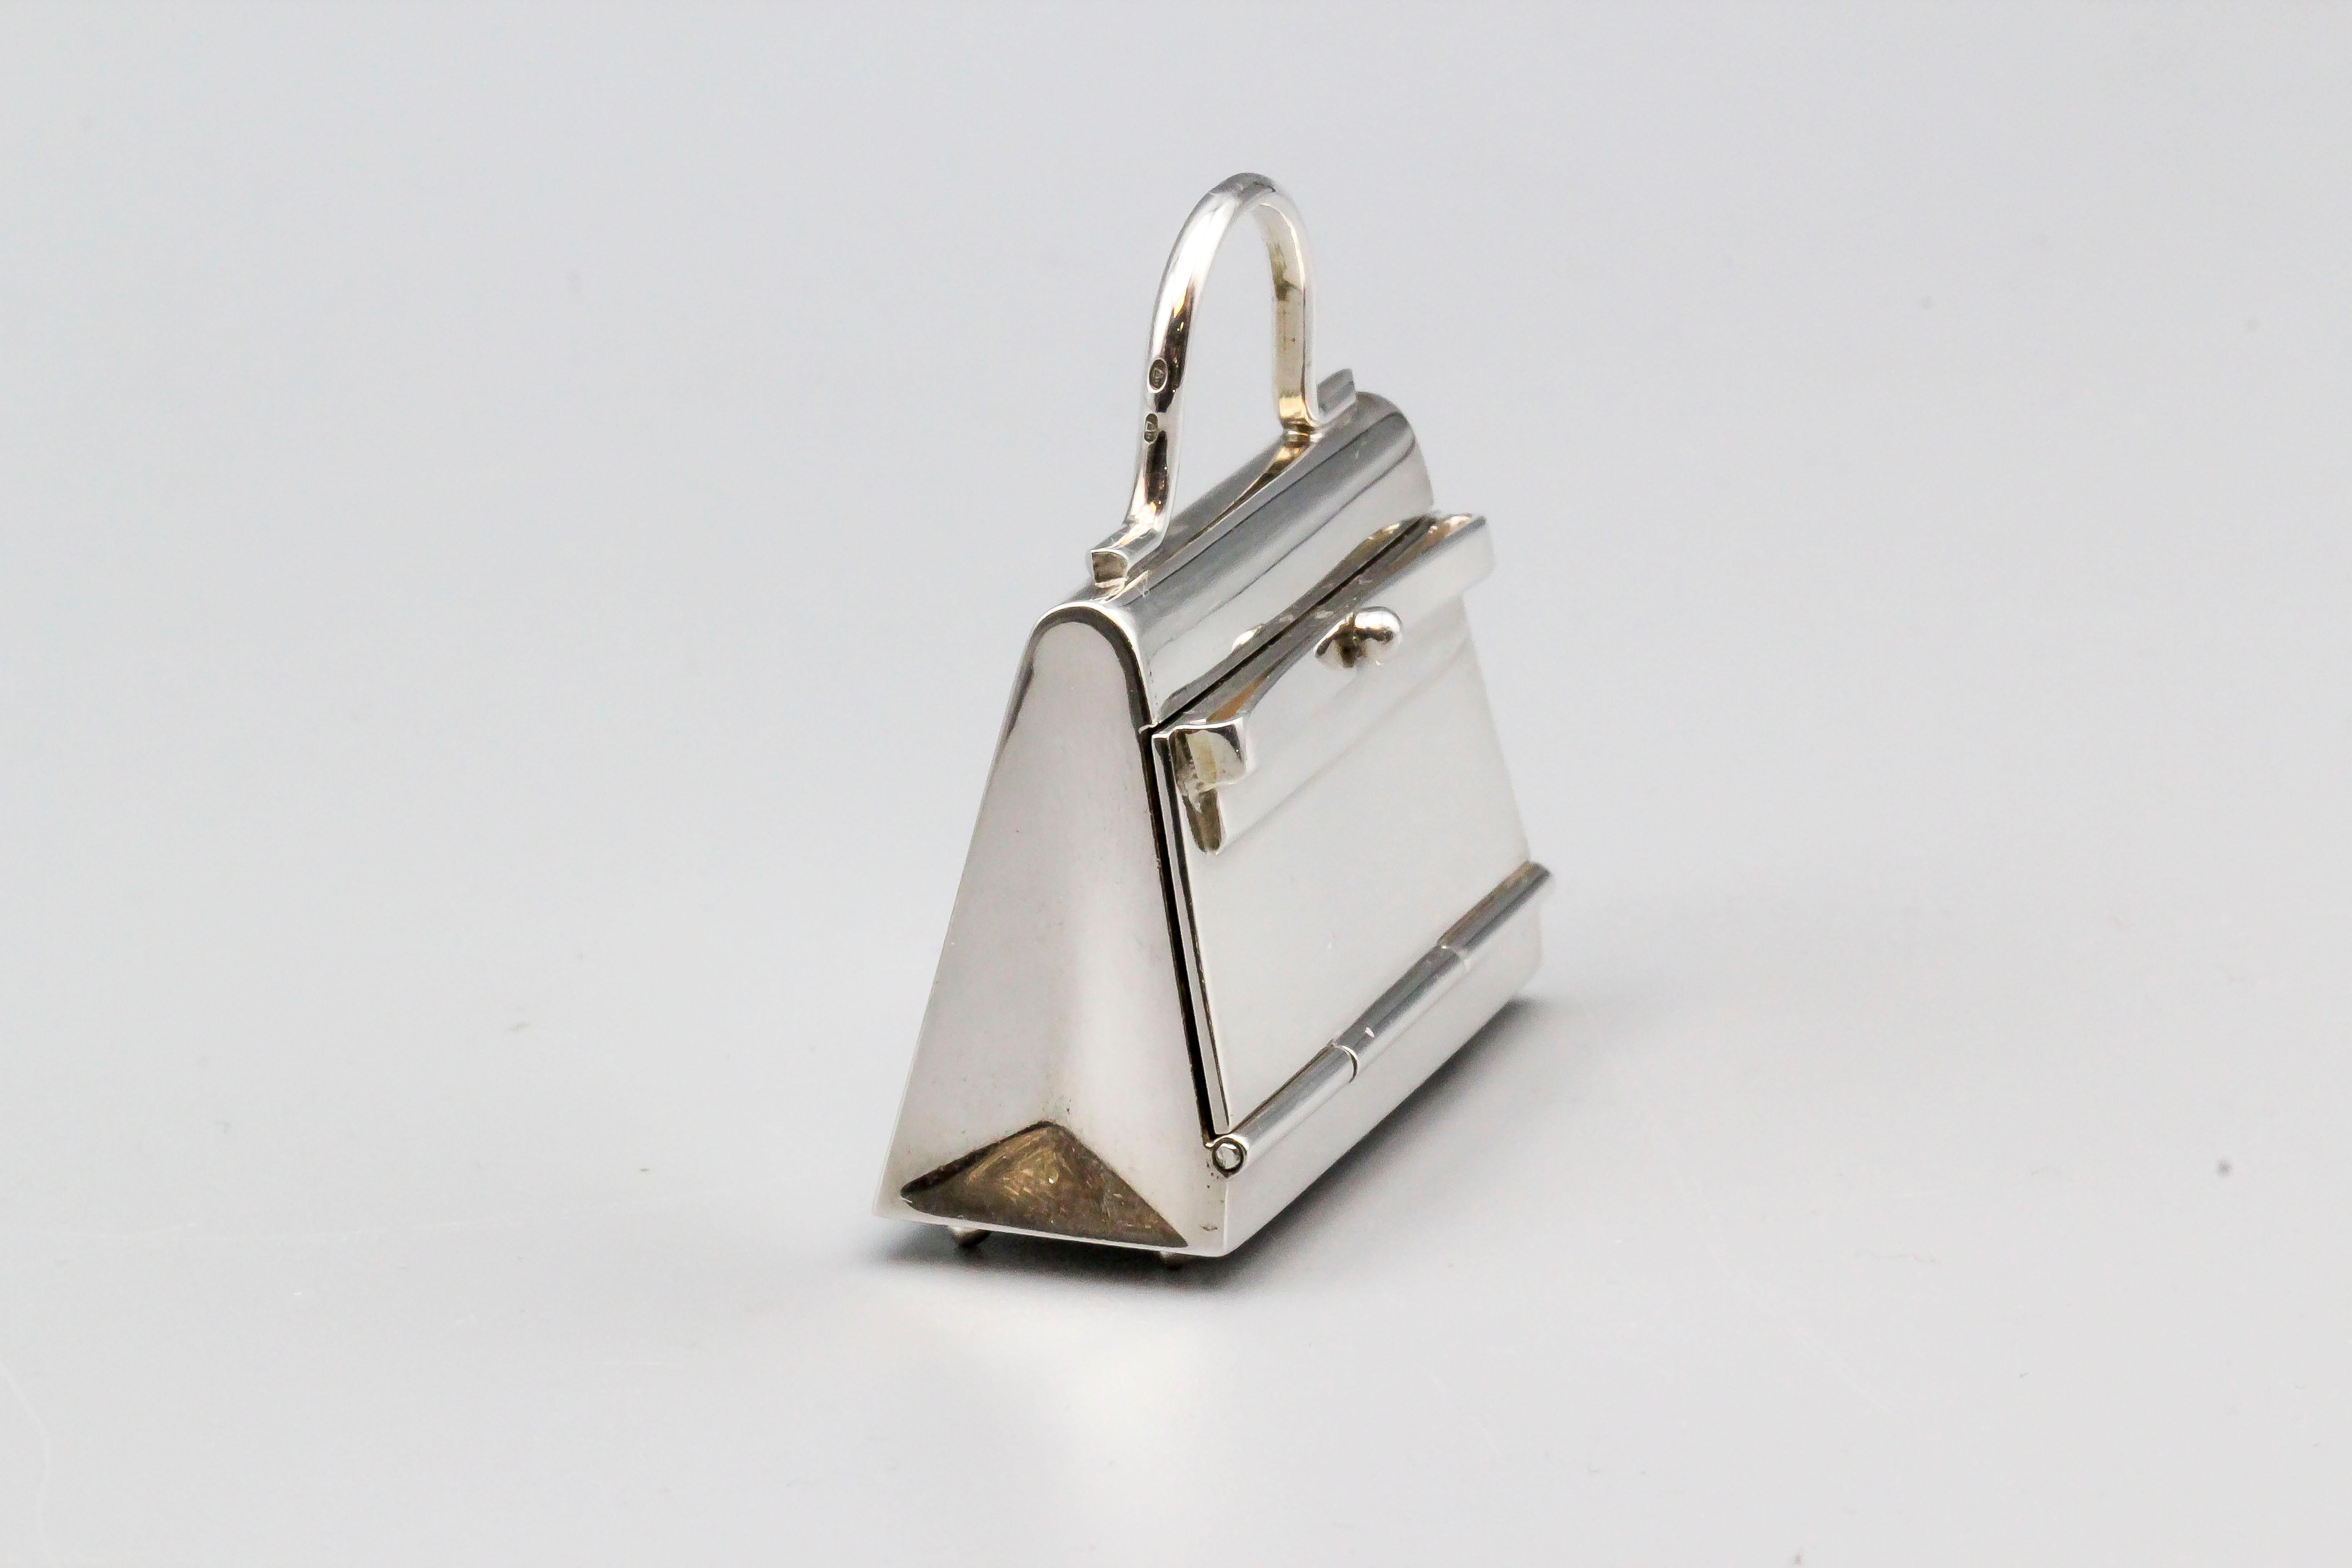 Fine sterling silver pill box in the likeness of an Hermes Kelly bag, by Hermes.  The box can be used in a multitude of ways: as a standard pillbox, a pendant, or as a charm.  Almost 2 inches wide and approx. 40 grams in weight.

Hallmarks: Hermes